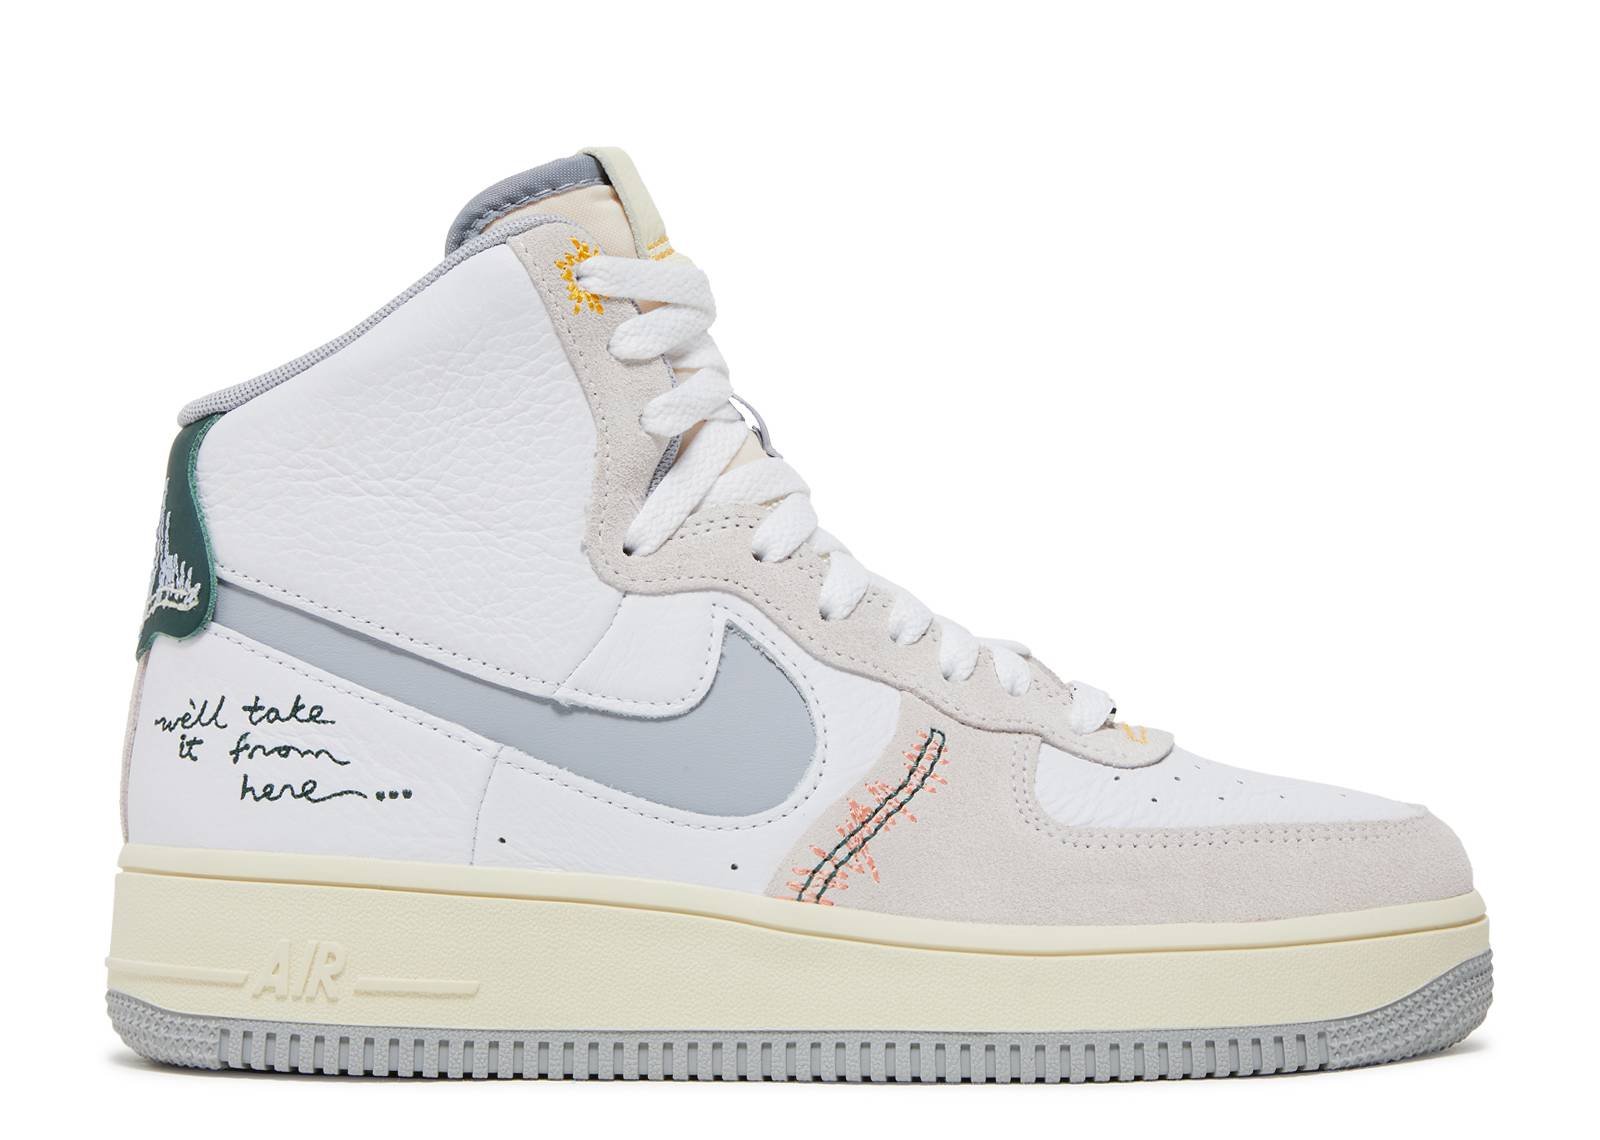 Wmns Air Force 1 High Sculpt 'We'll Take It From Here'